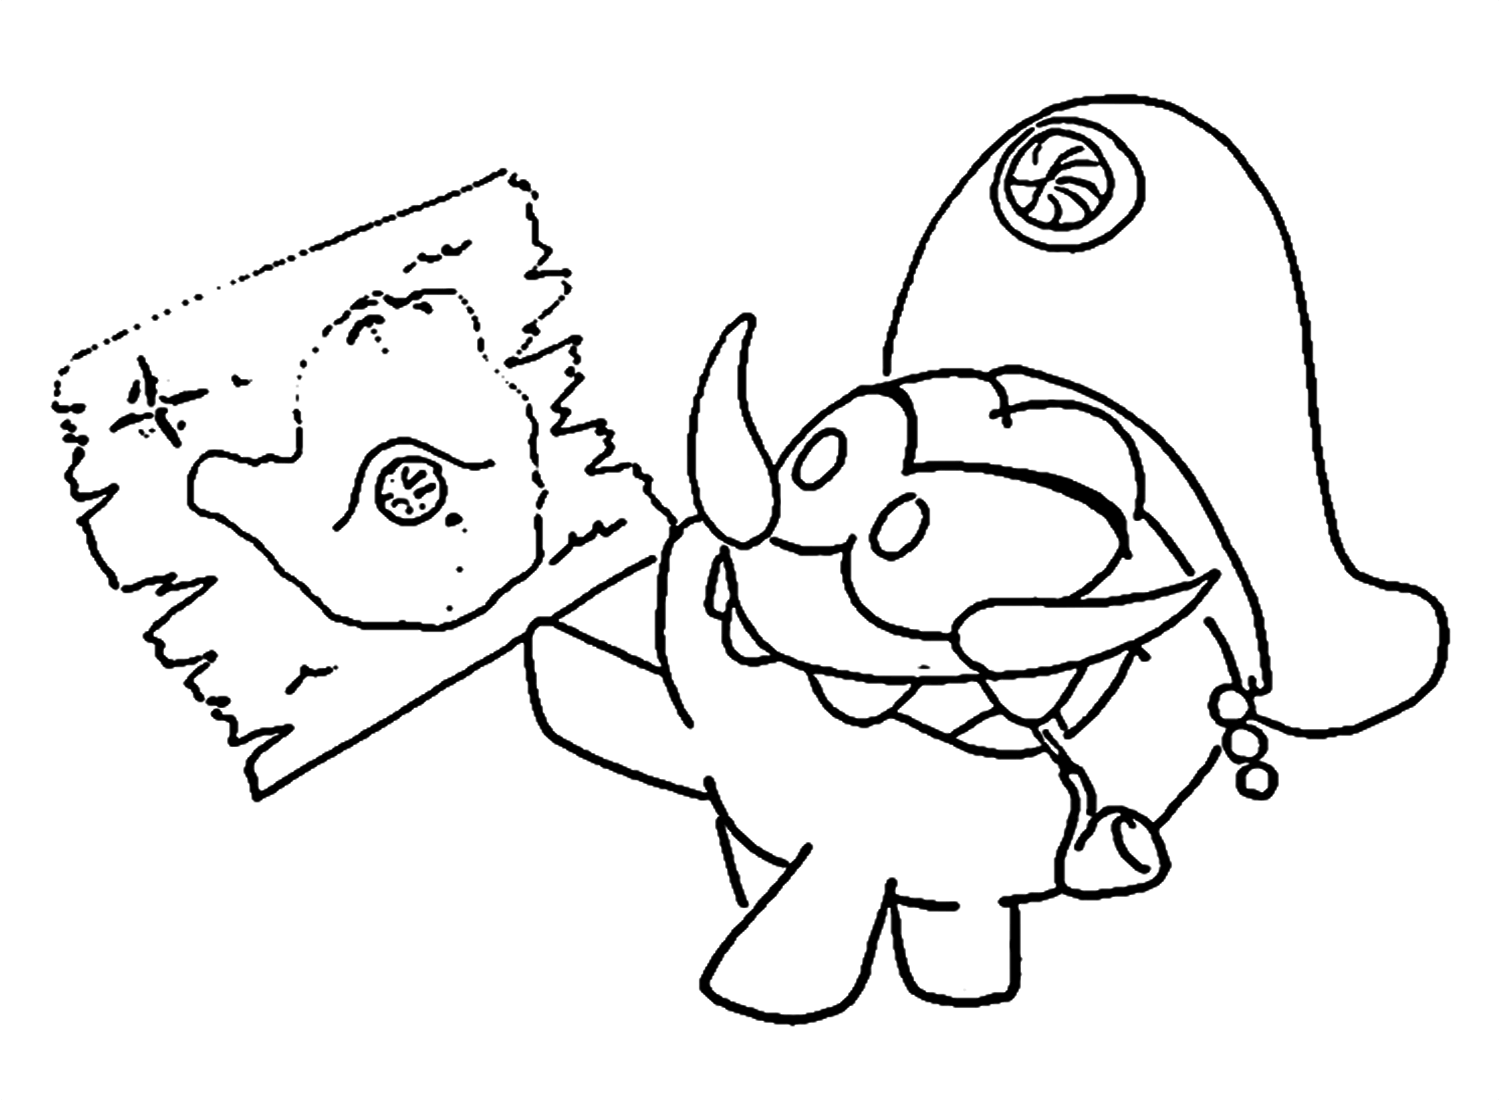 Pirate Om Nom And Treasure Map Coloring Pages